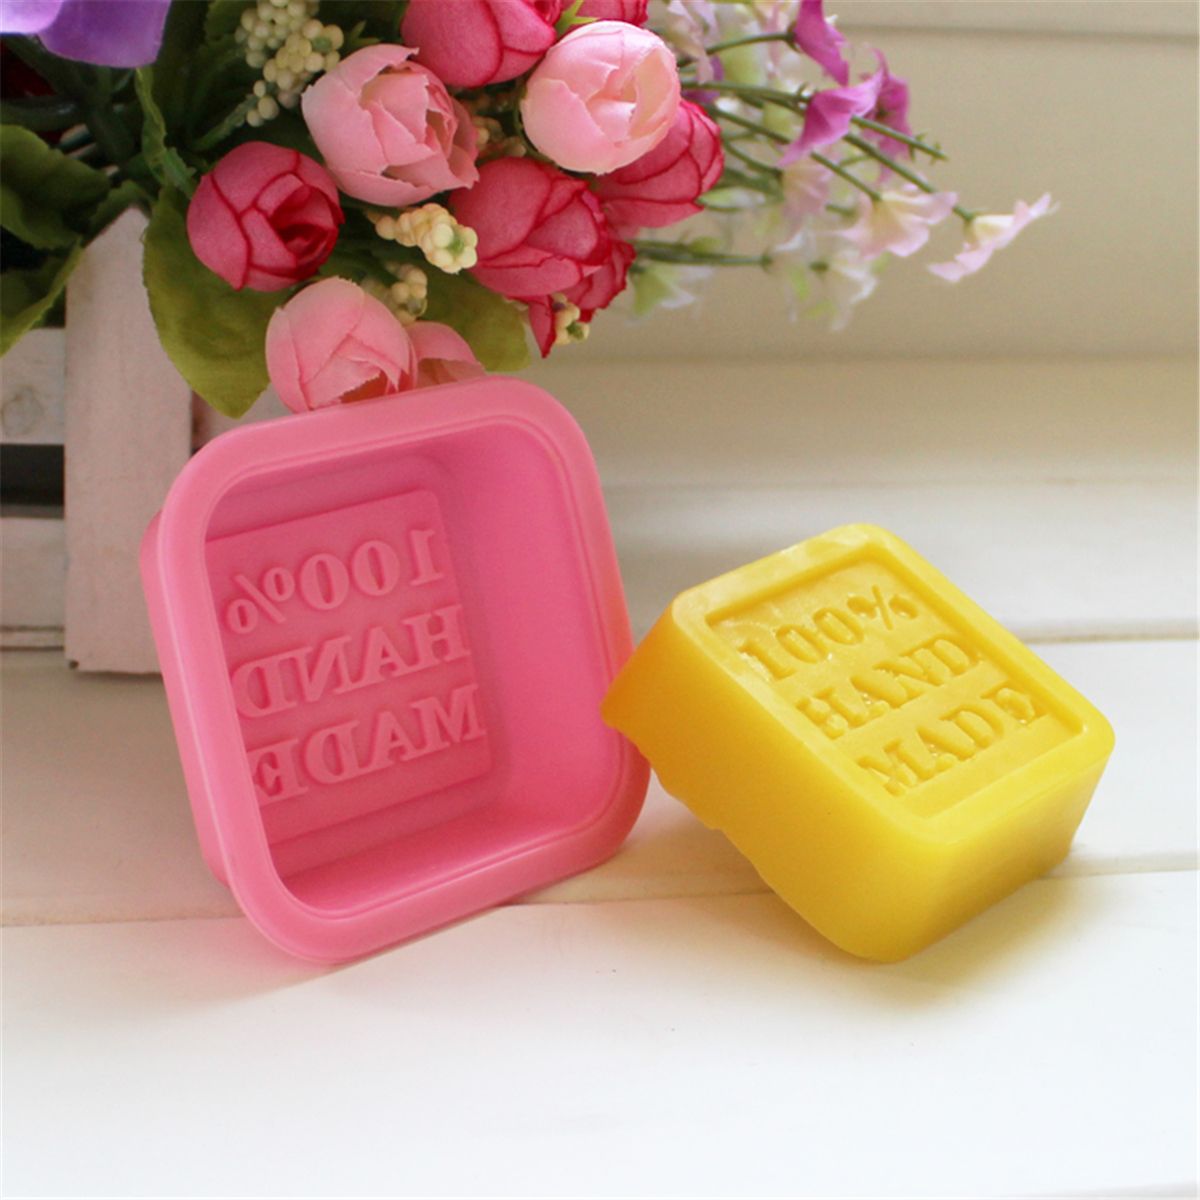 25PcsSet-Handmade-Silicone-Soap-Mold-Square-Flexible-Baking-Mold-for-Soap-Making-Cupcake-DIY-Homemad-1439426